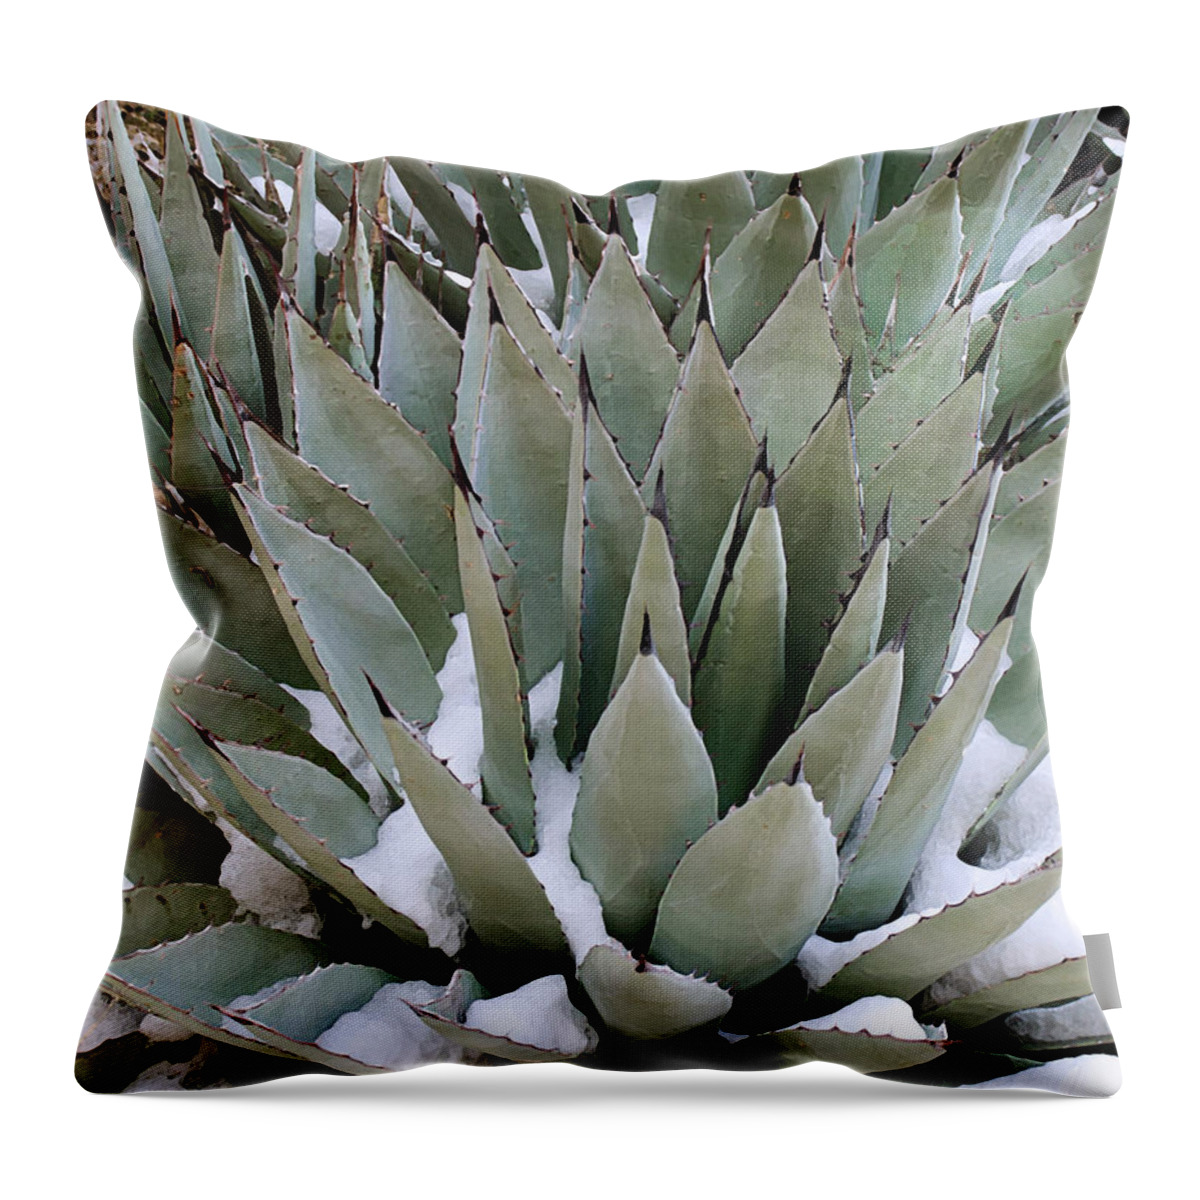 Agave Throw Pillow featuring the digital art Snow Agave by Karen Conley